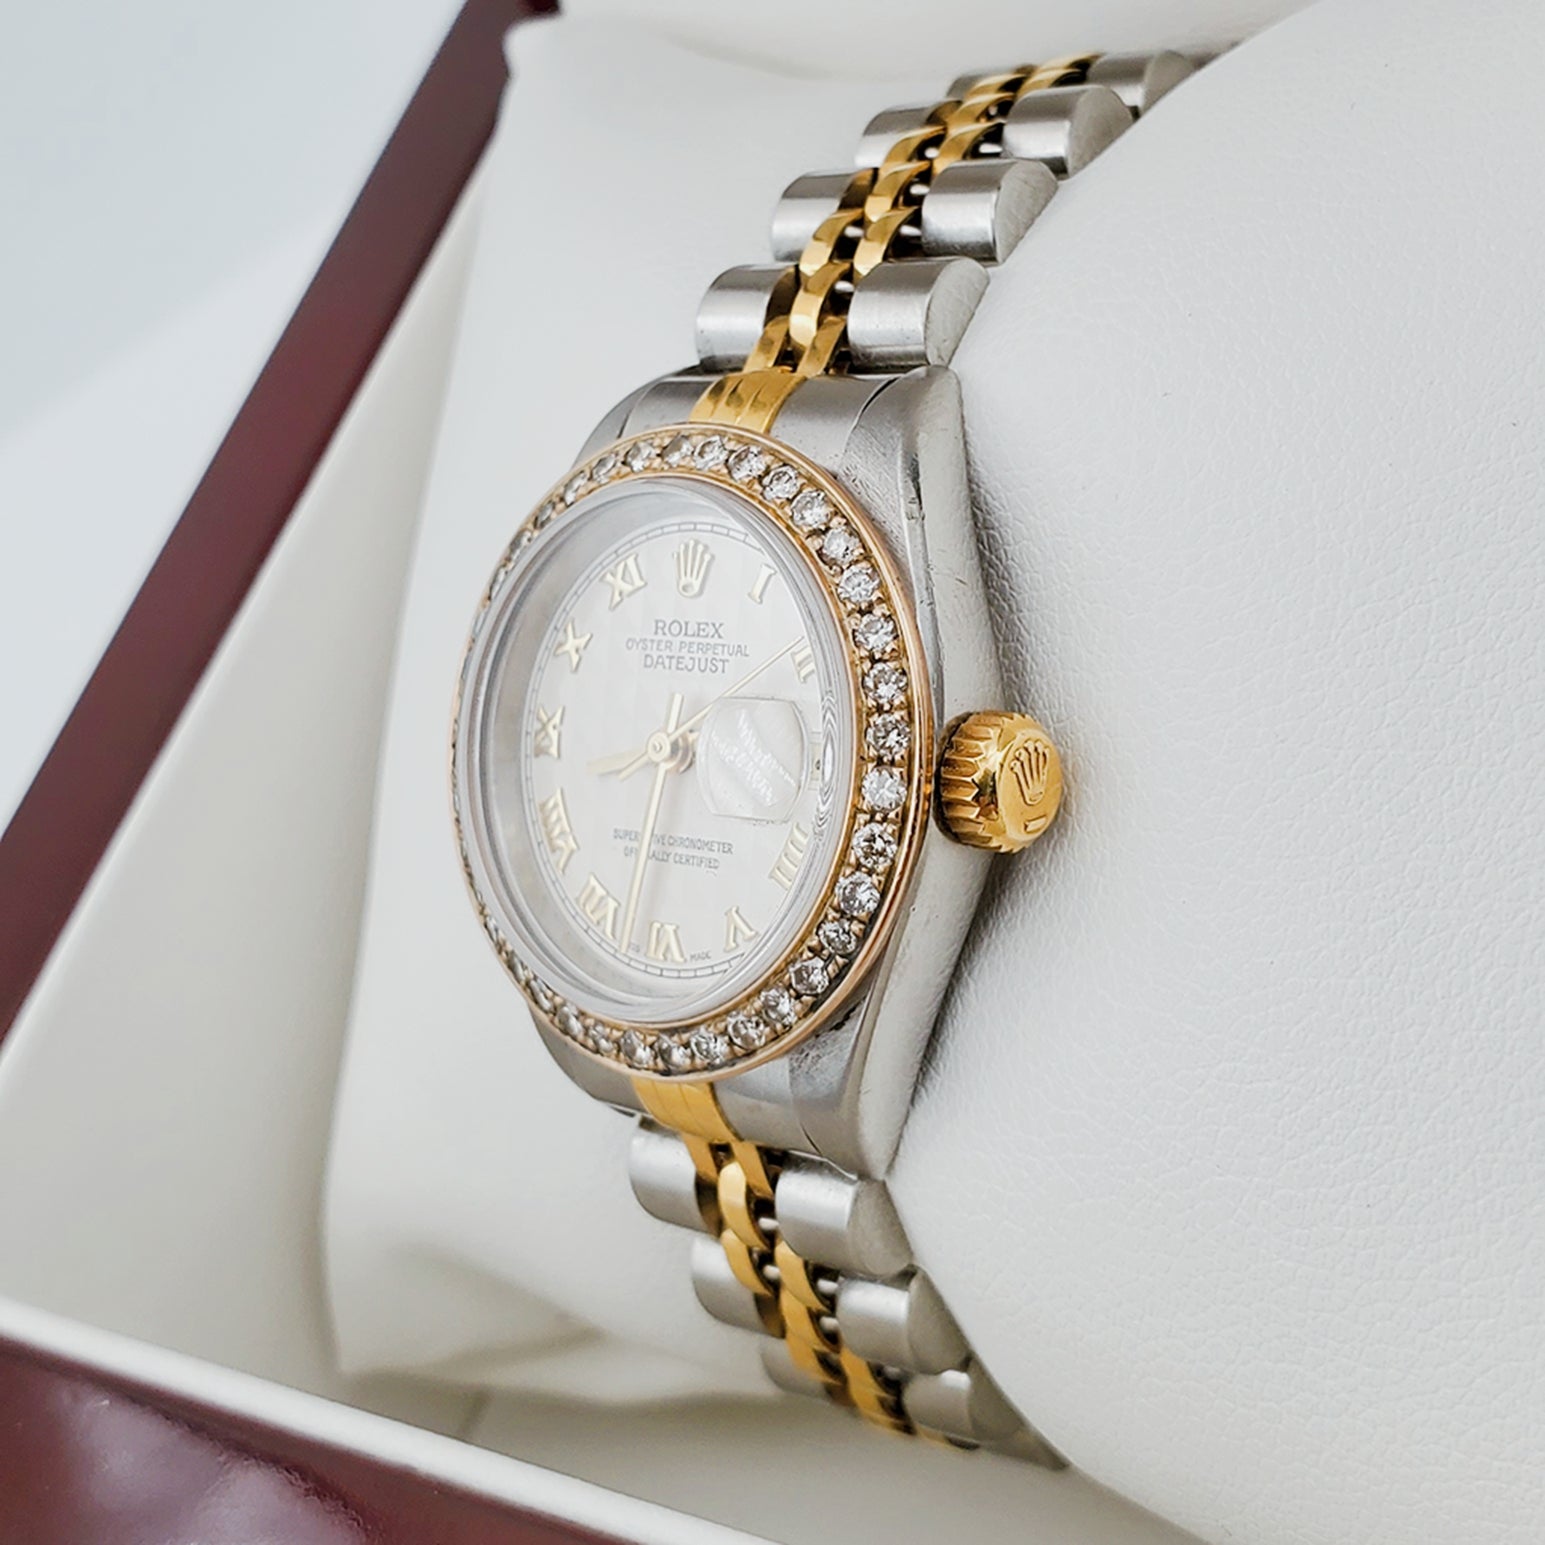 Ladies Rolex 18K Gold Two Tone 26mm DateJust Watch with Roman Numerals, Off-White Dial and Diamond Bezel. (Pre-Owned)